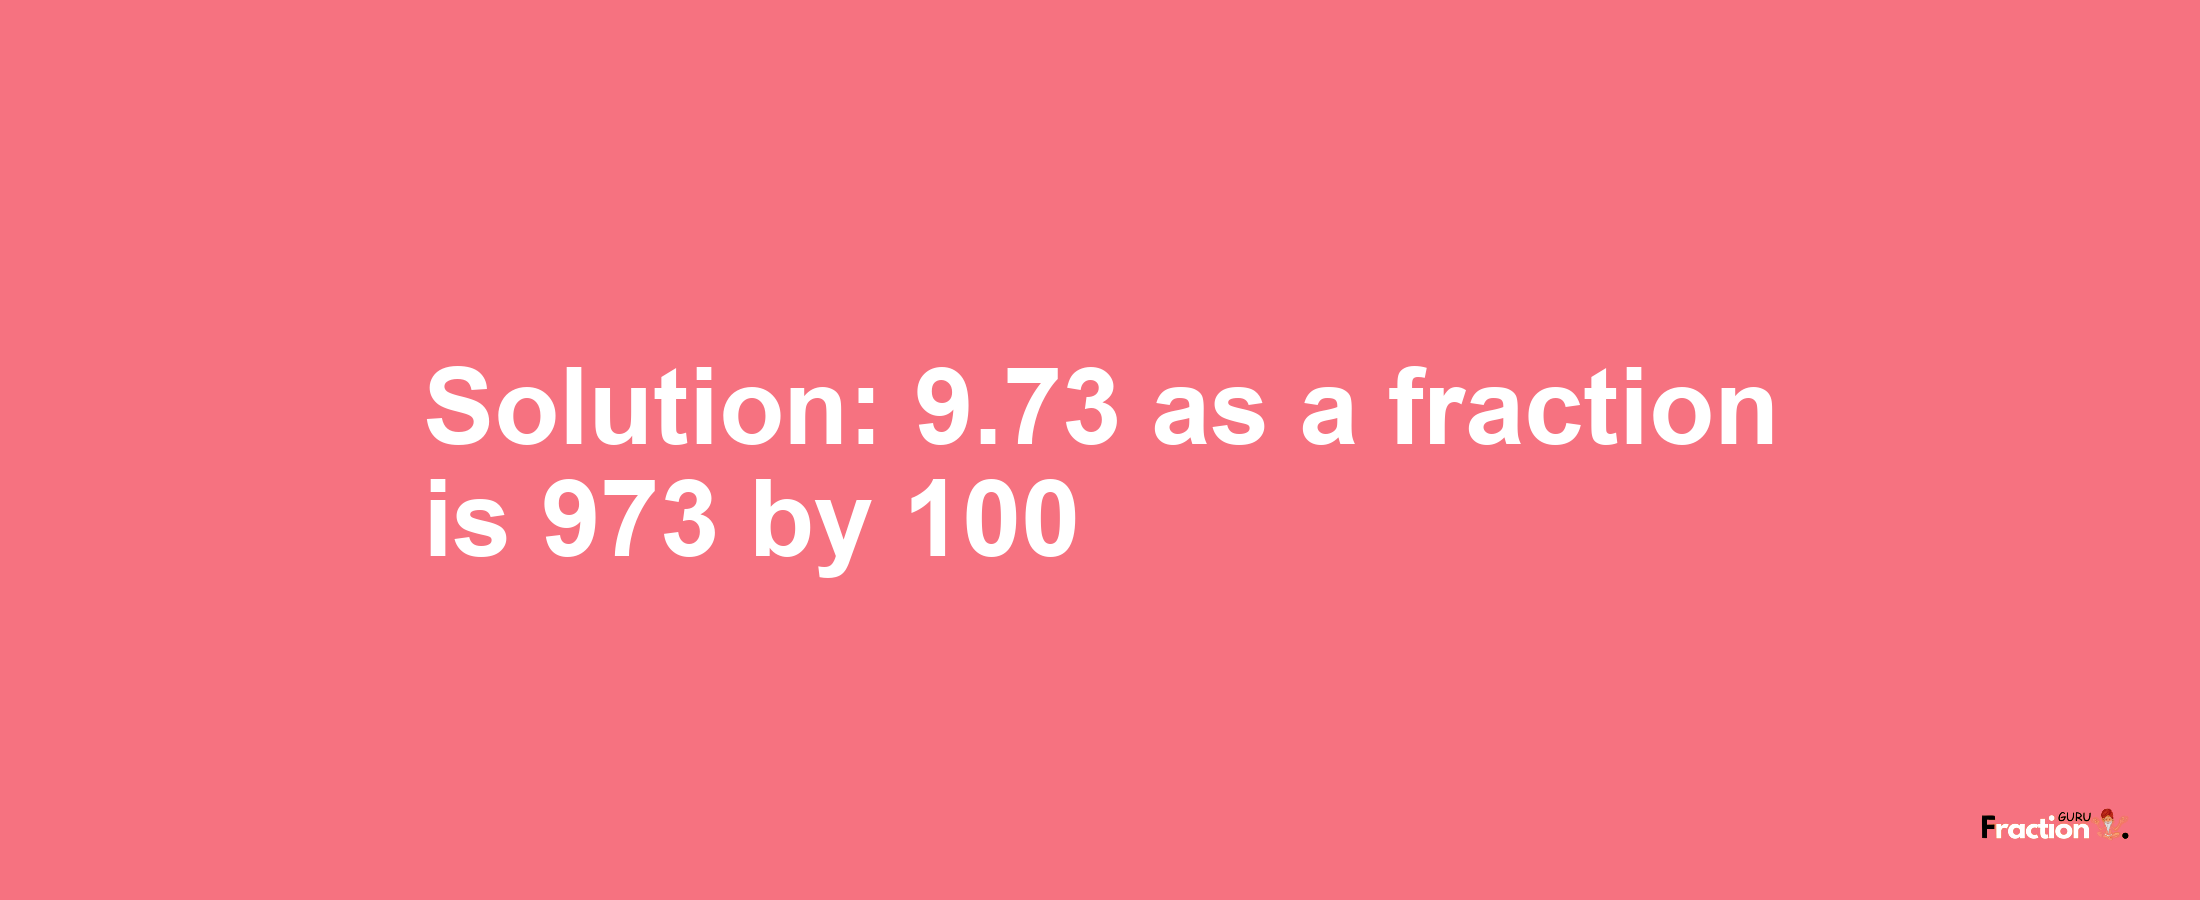 Solution:9.73 as a fraction is 973/100